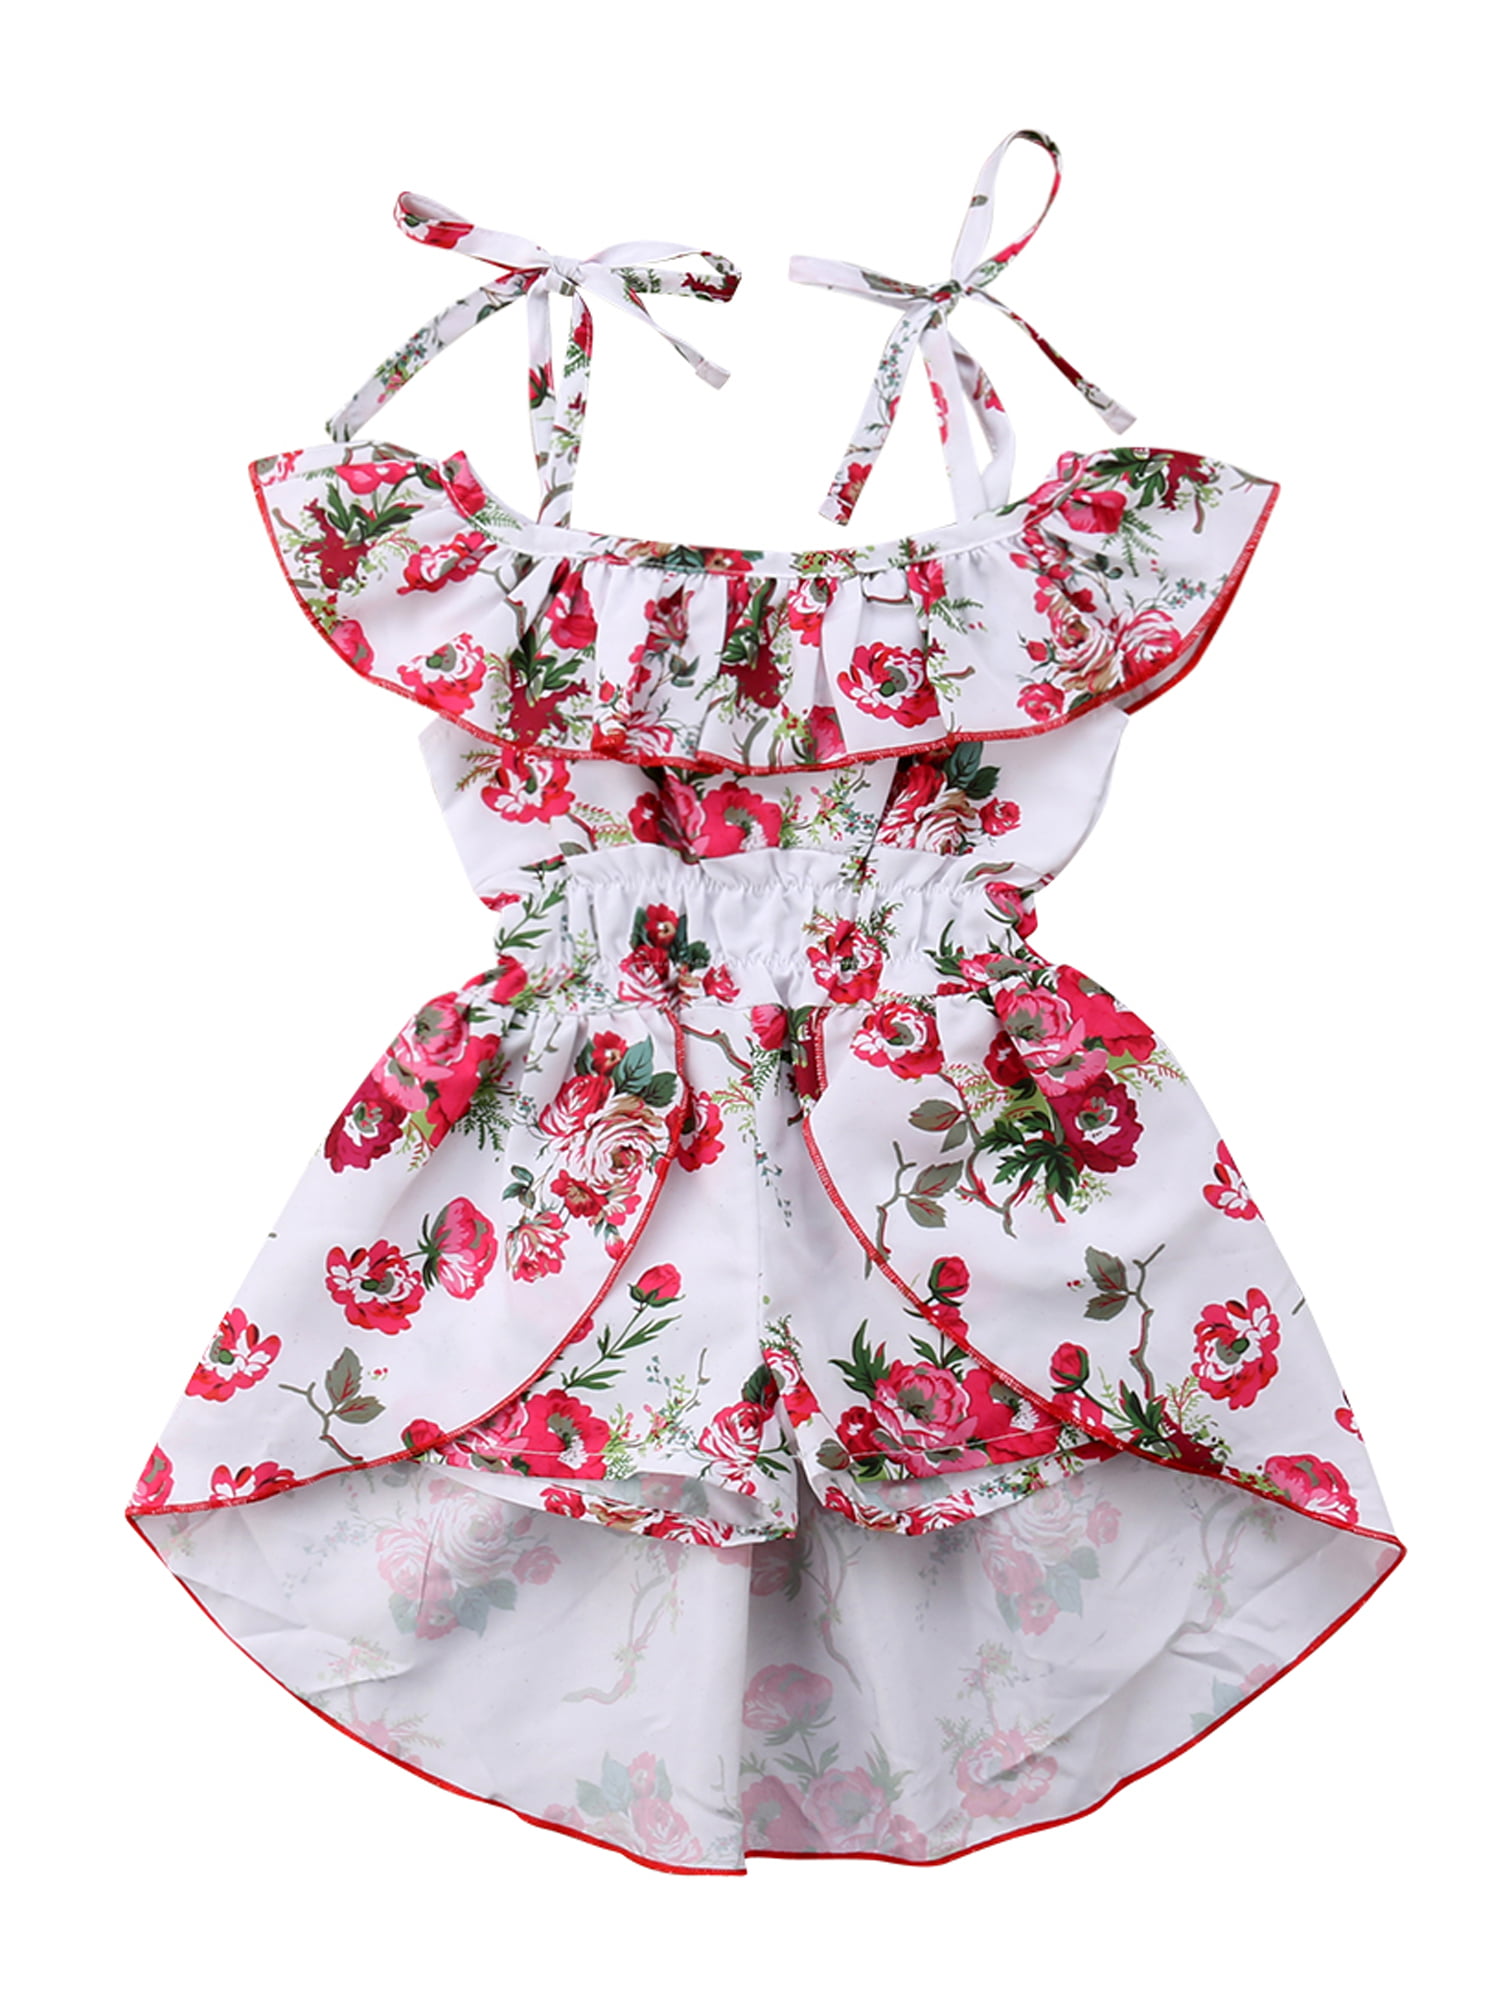 Pudcoco Toddler Kids Baby Girl Clothes Romper Bodysuit Jumpsuit Outfits ...